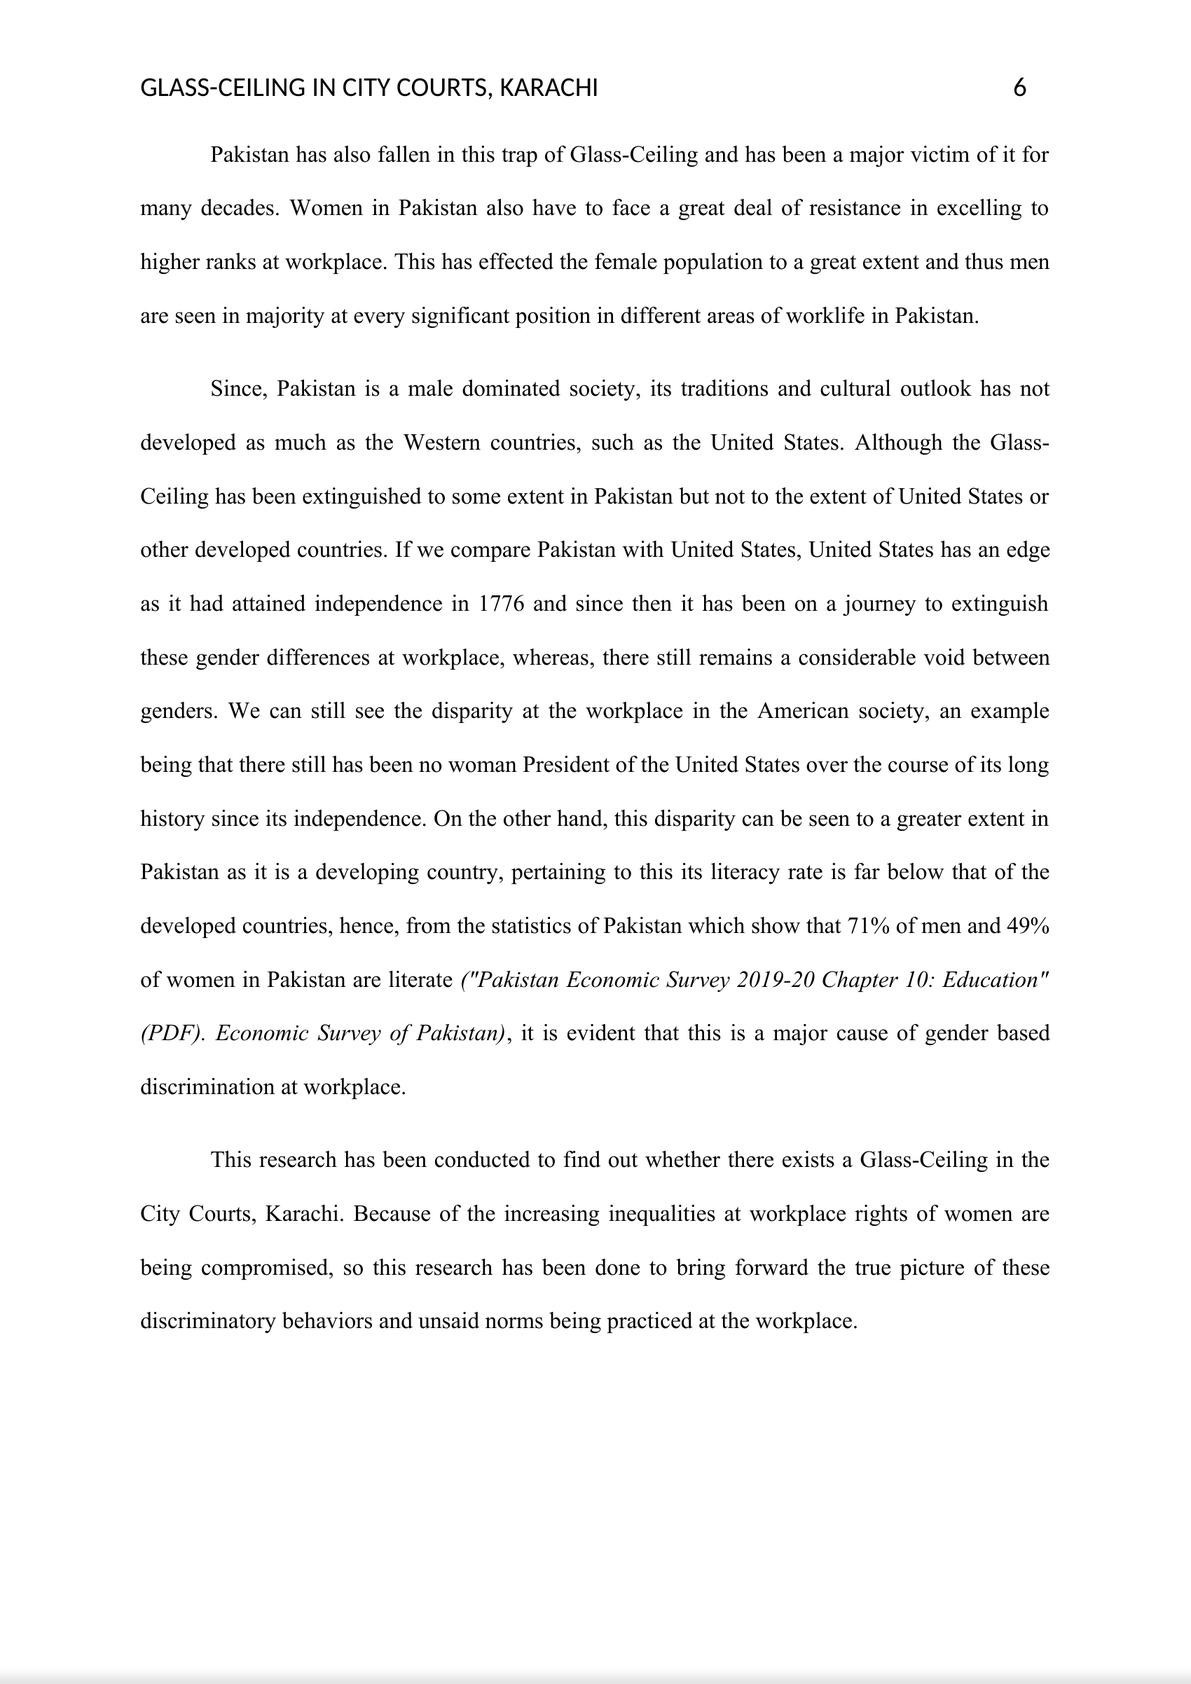 Research Paper - Existence of Glass-Ceiling in City Courts, Karachi-6